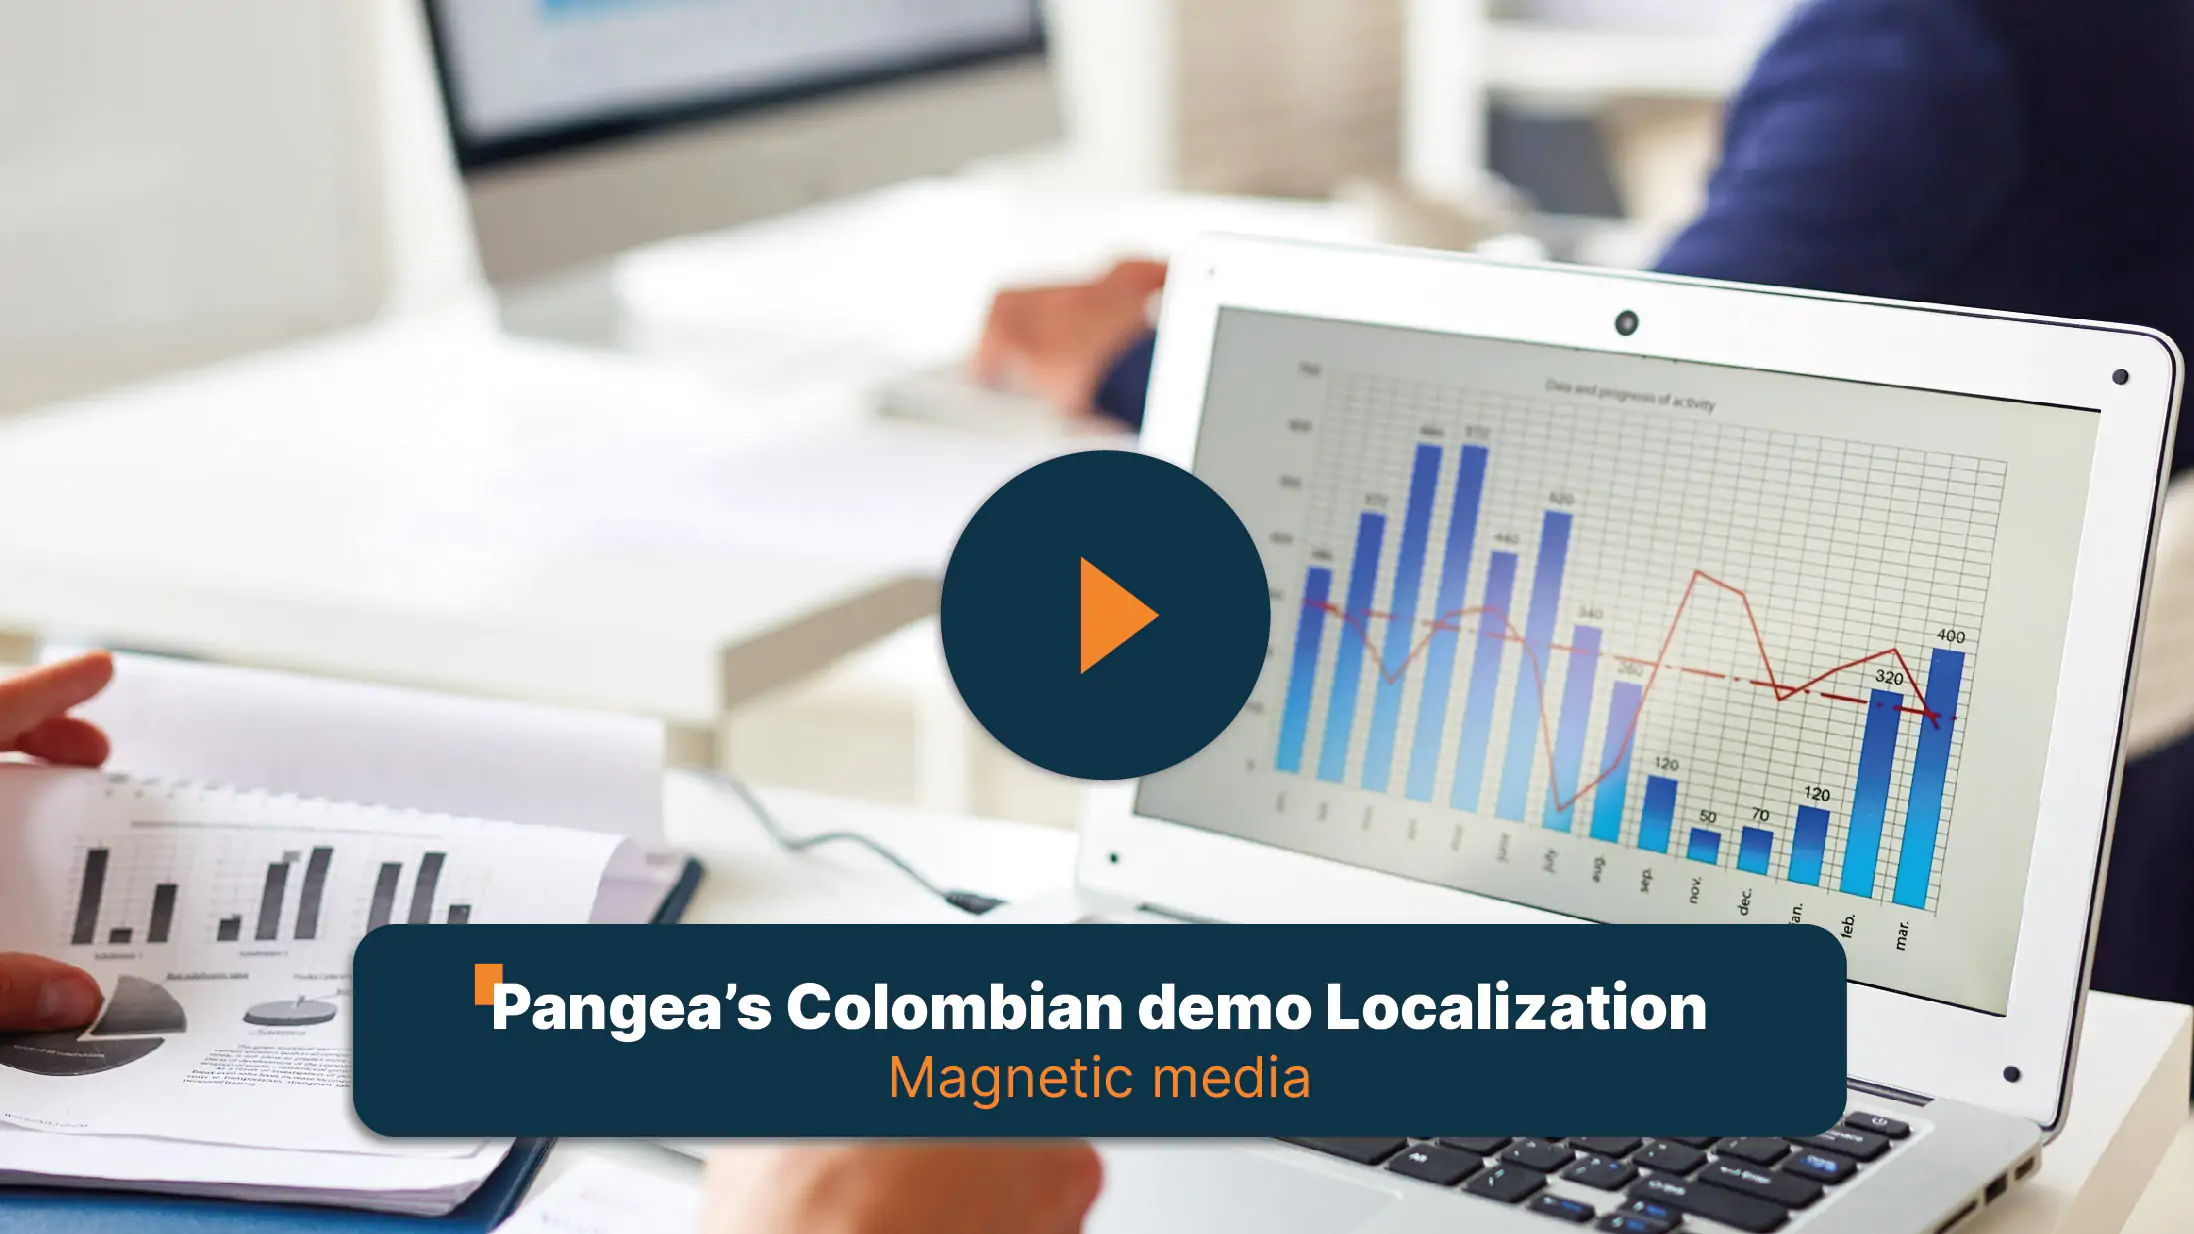 Session III: Pangea Consultants' Colombian Localization